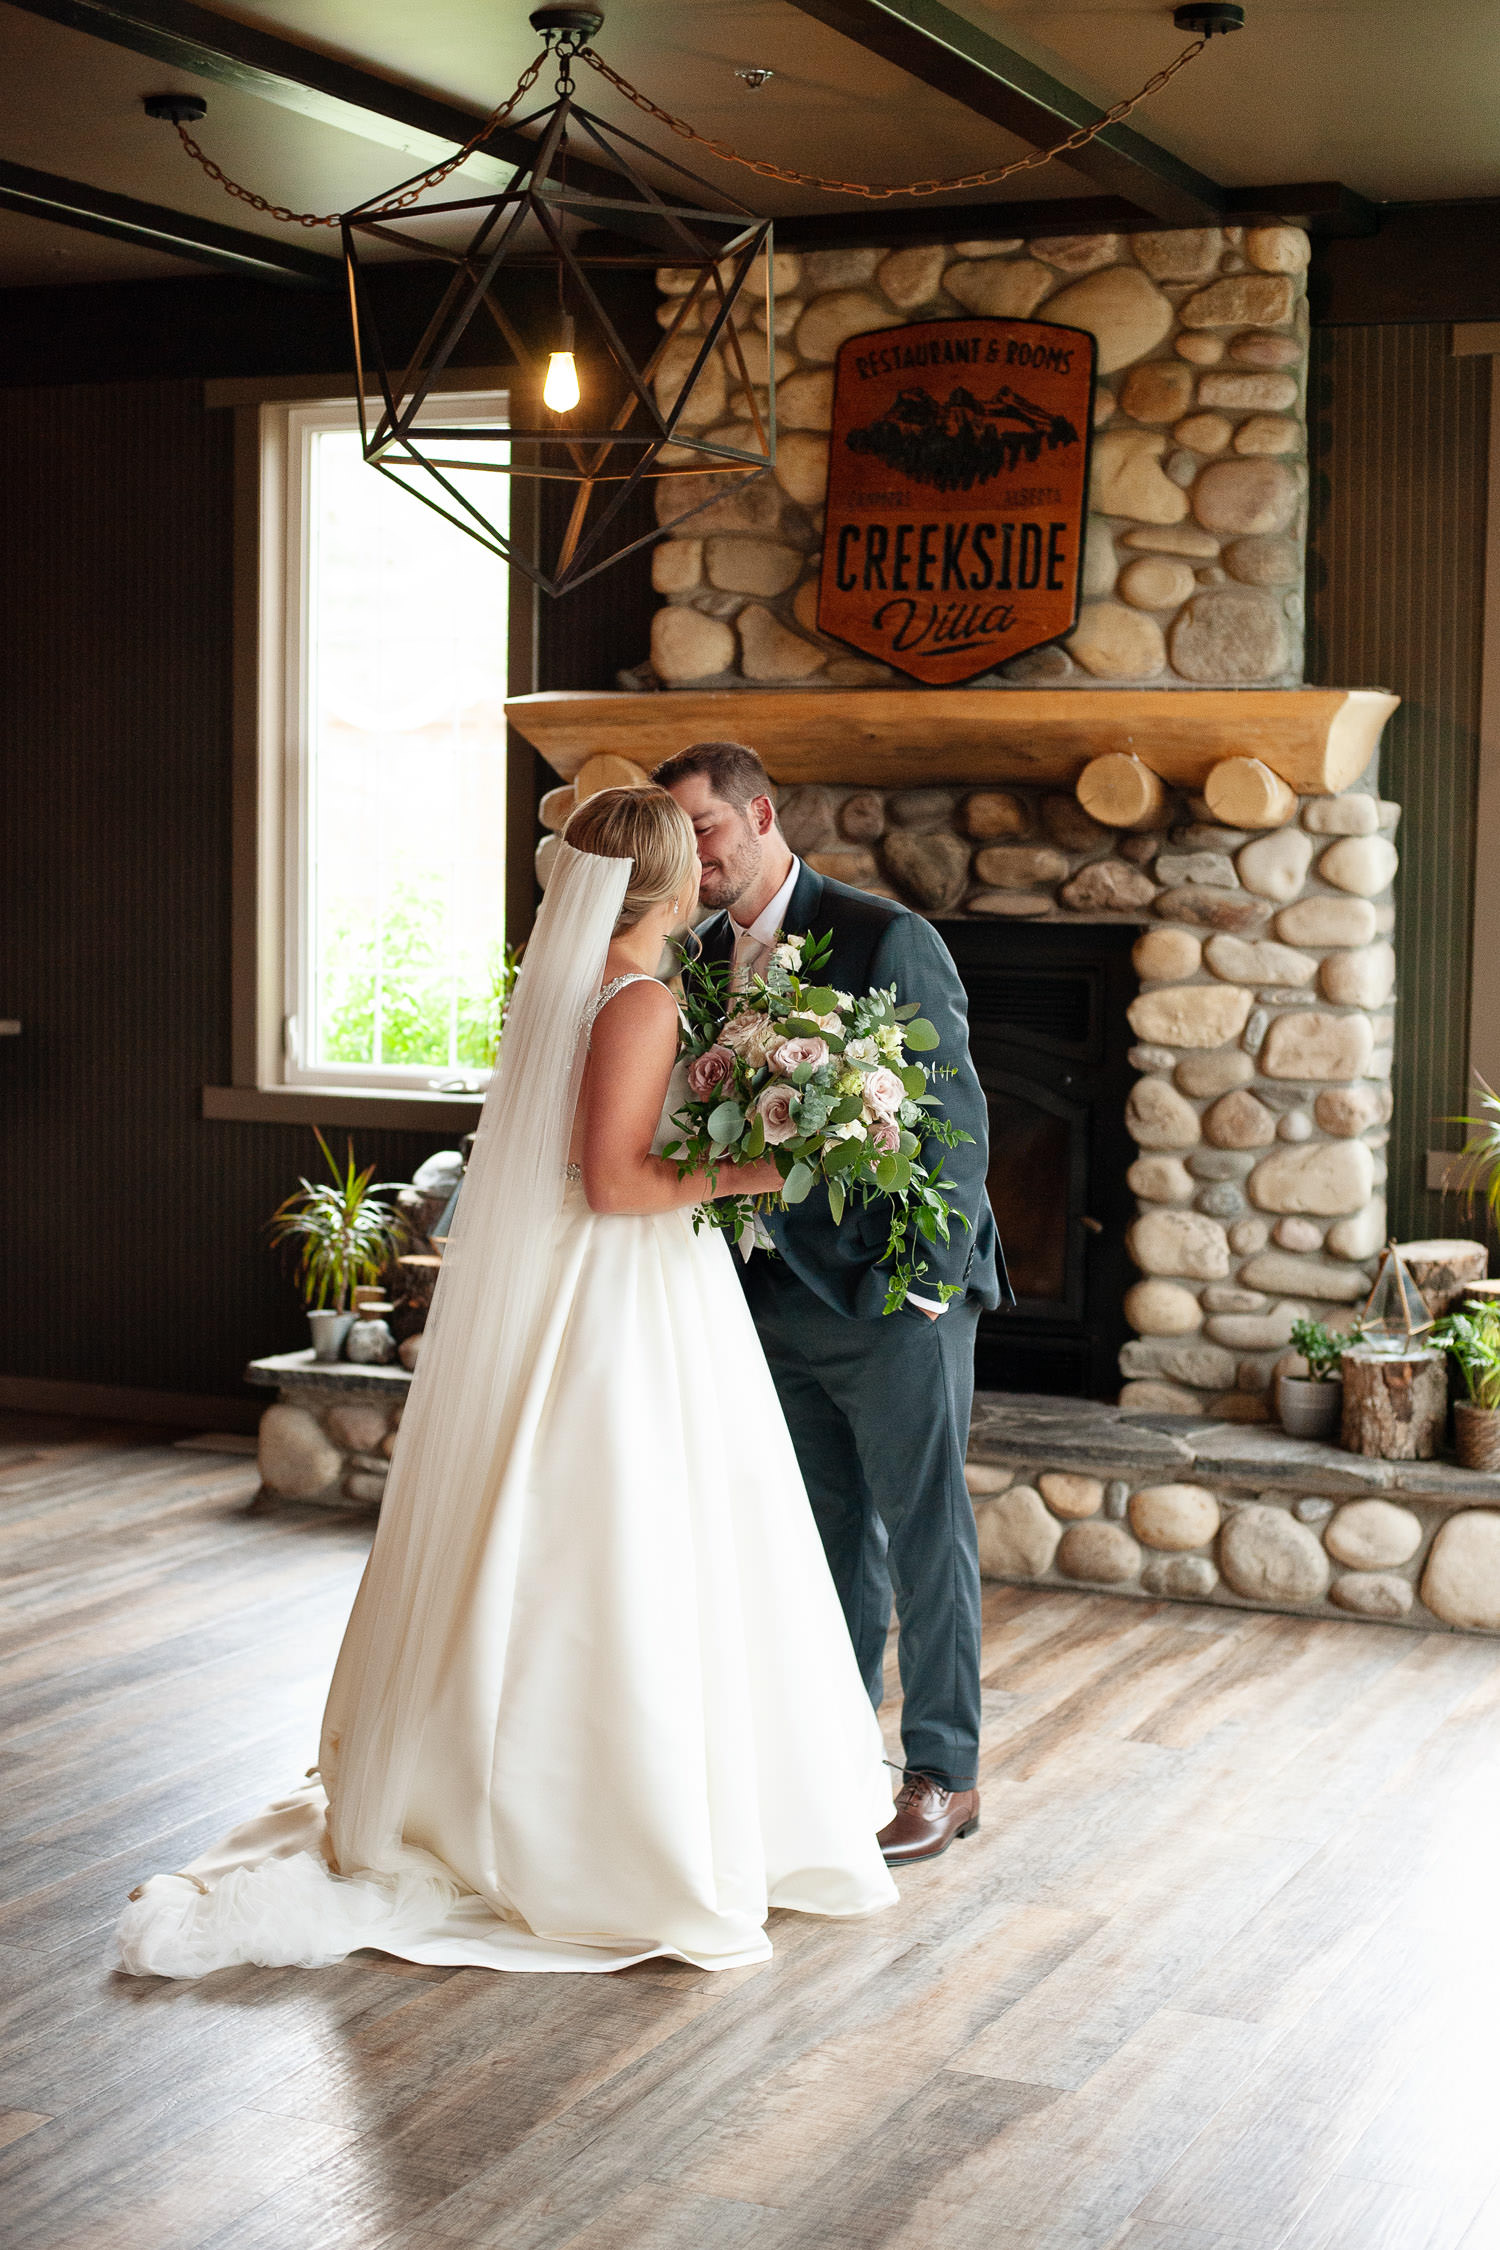 Bride and groom kiss during first look at Creekside Villa wedding captured by Tara Whittaker Photography